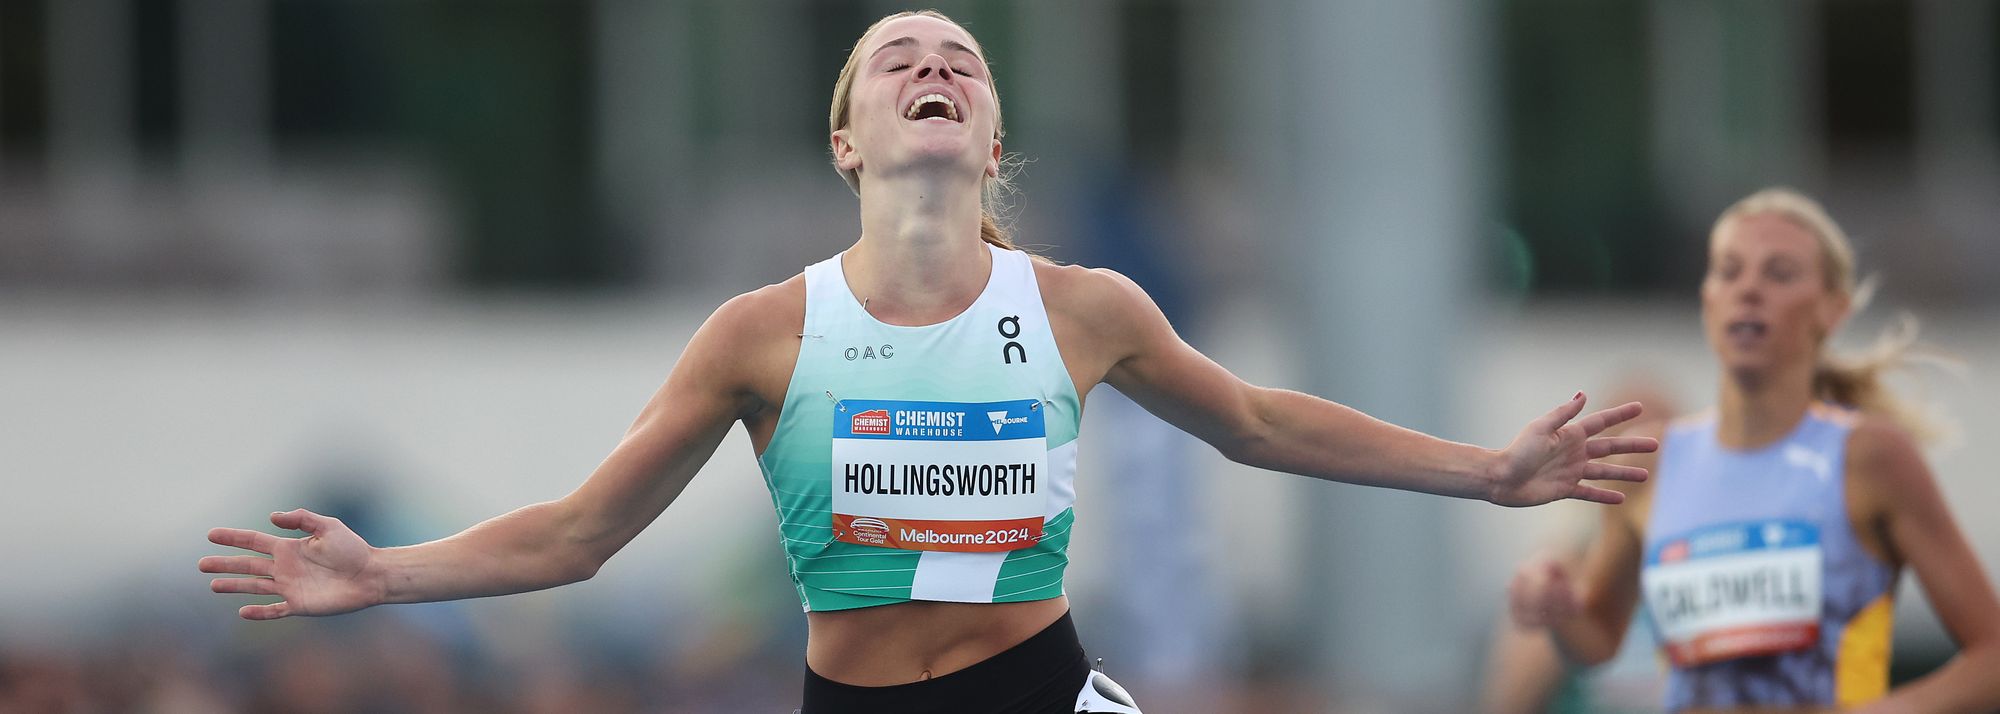 The battle between youth and the establishment at Melbourne’s Maurie Plant Meet, the first of this year’s World Athletics Continental Tour Gold events, turned out to be inconclusive